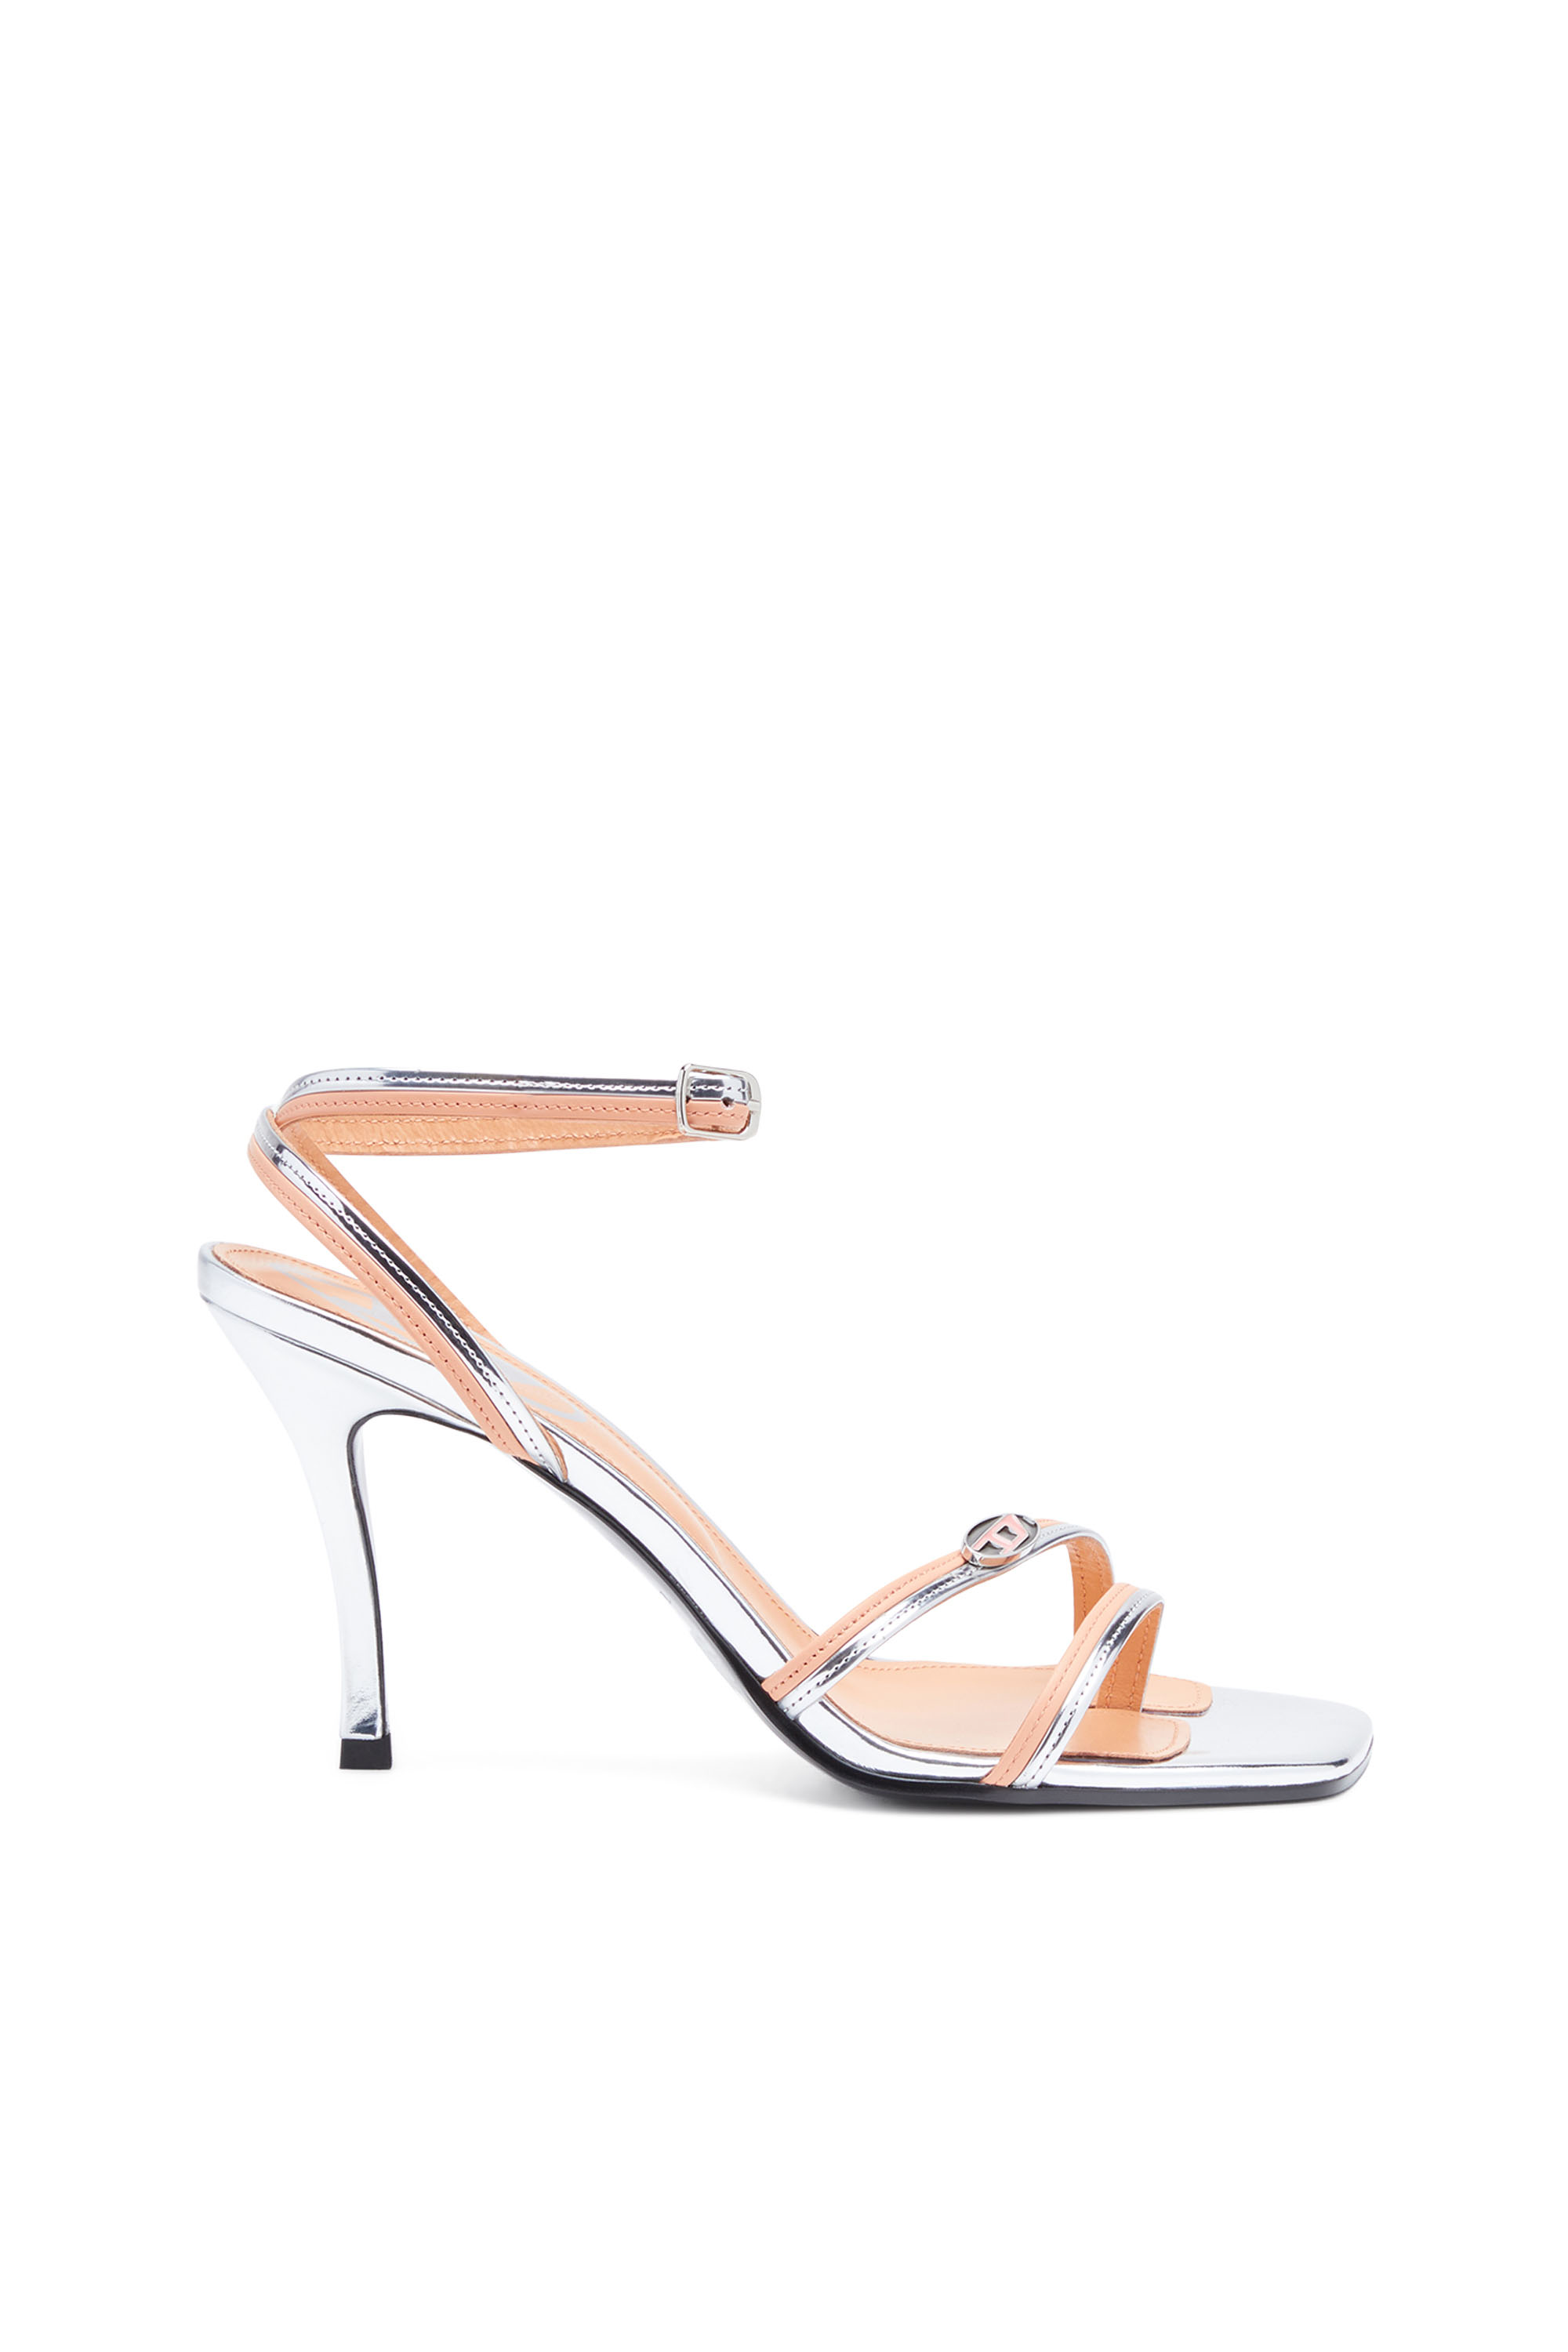 Diesel Strappy Sandals In Two-tone Leather In Argento